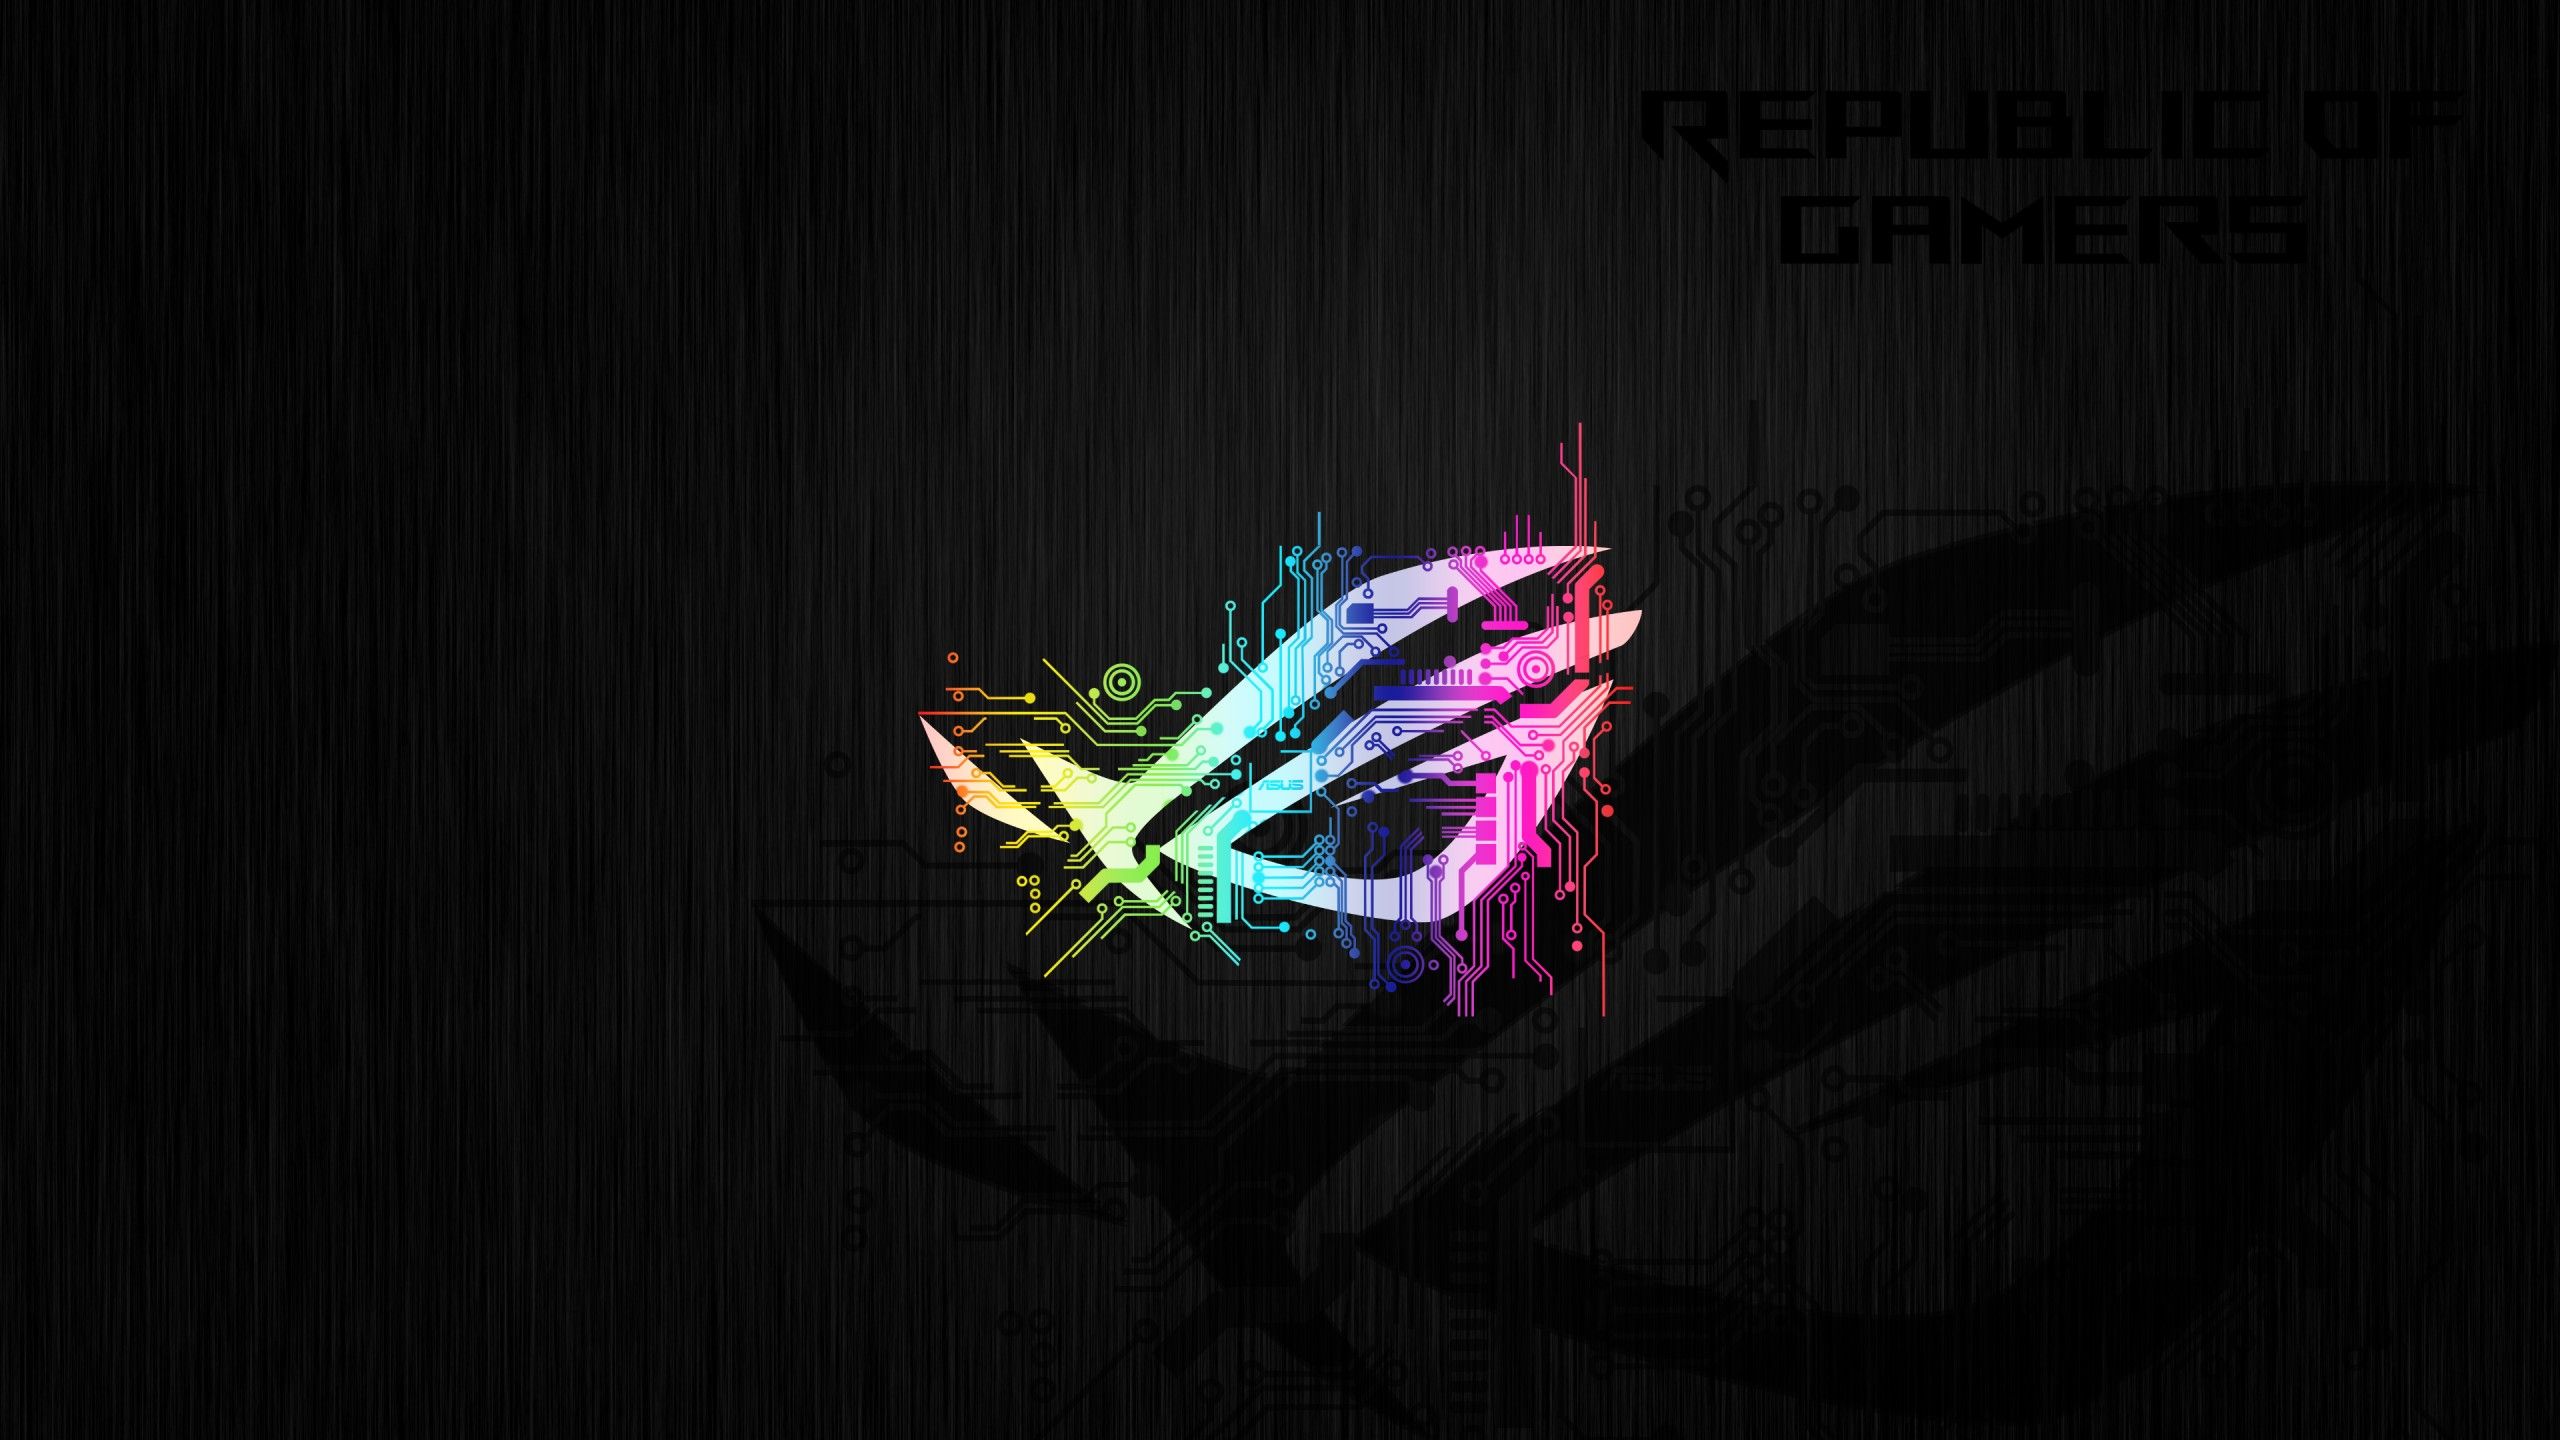 Wallpaper Republic of Gamers, ASUS ROG, Colorful, Neon, 4K, Technology,. Wallpaper for iPhone, Android, Mobile and Desktop